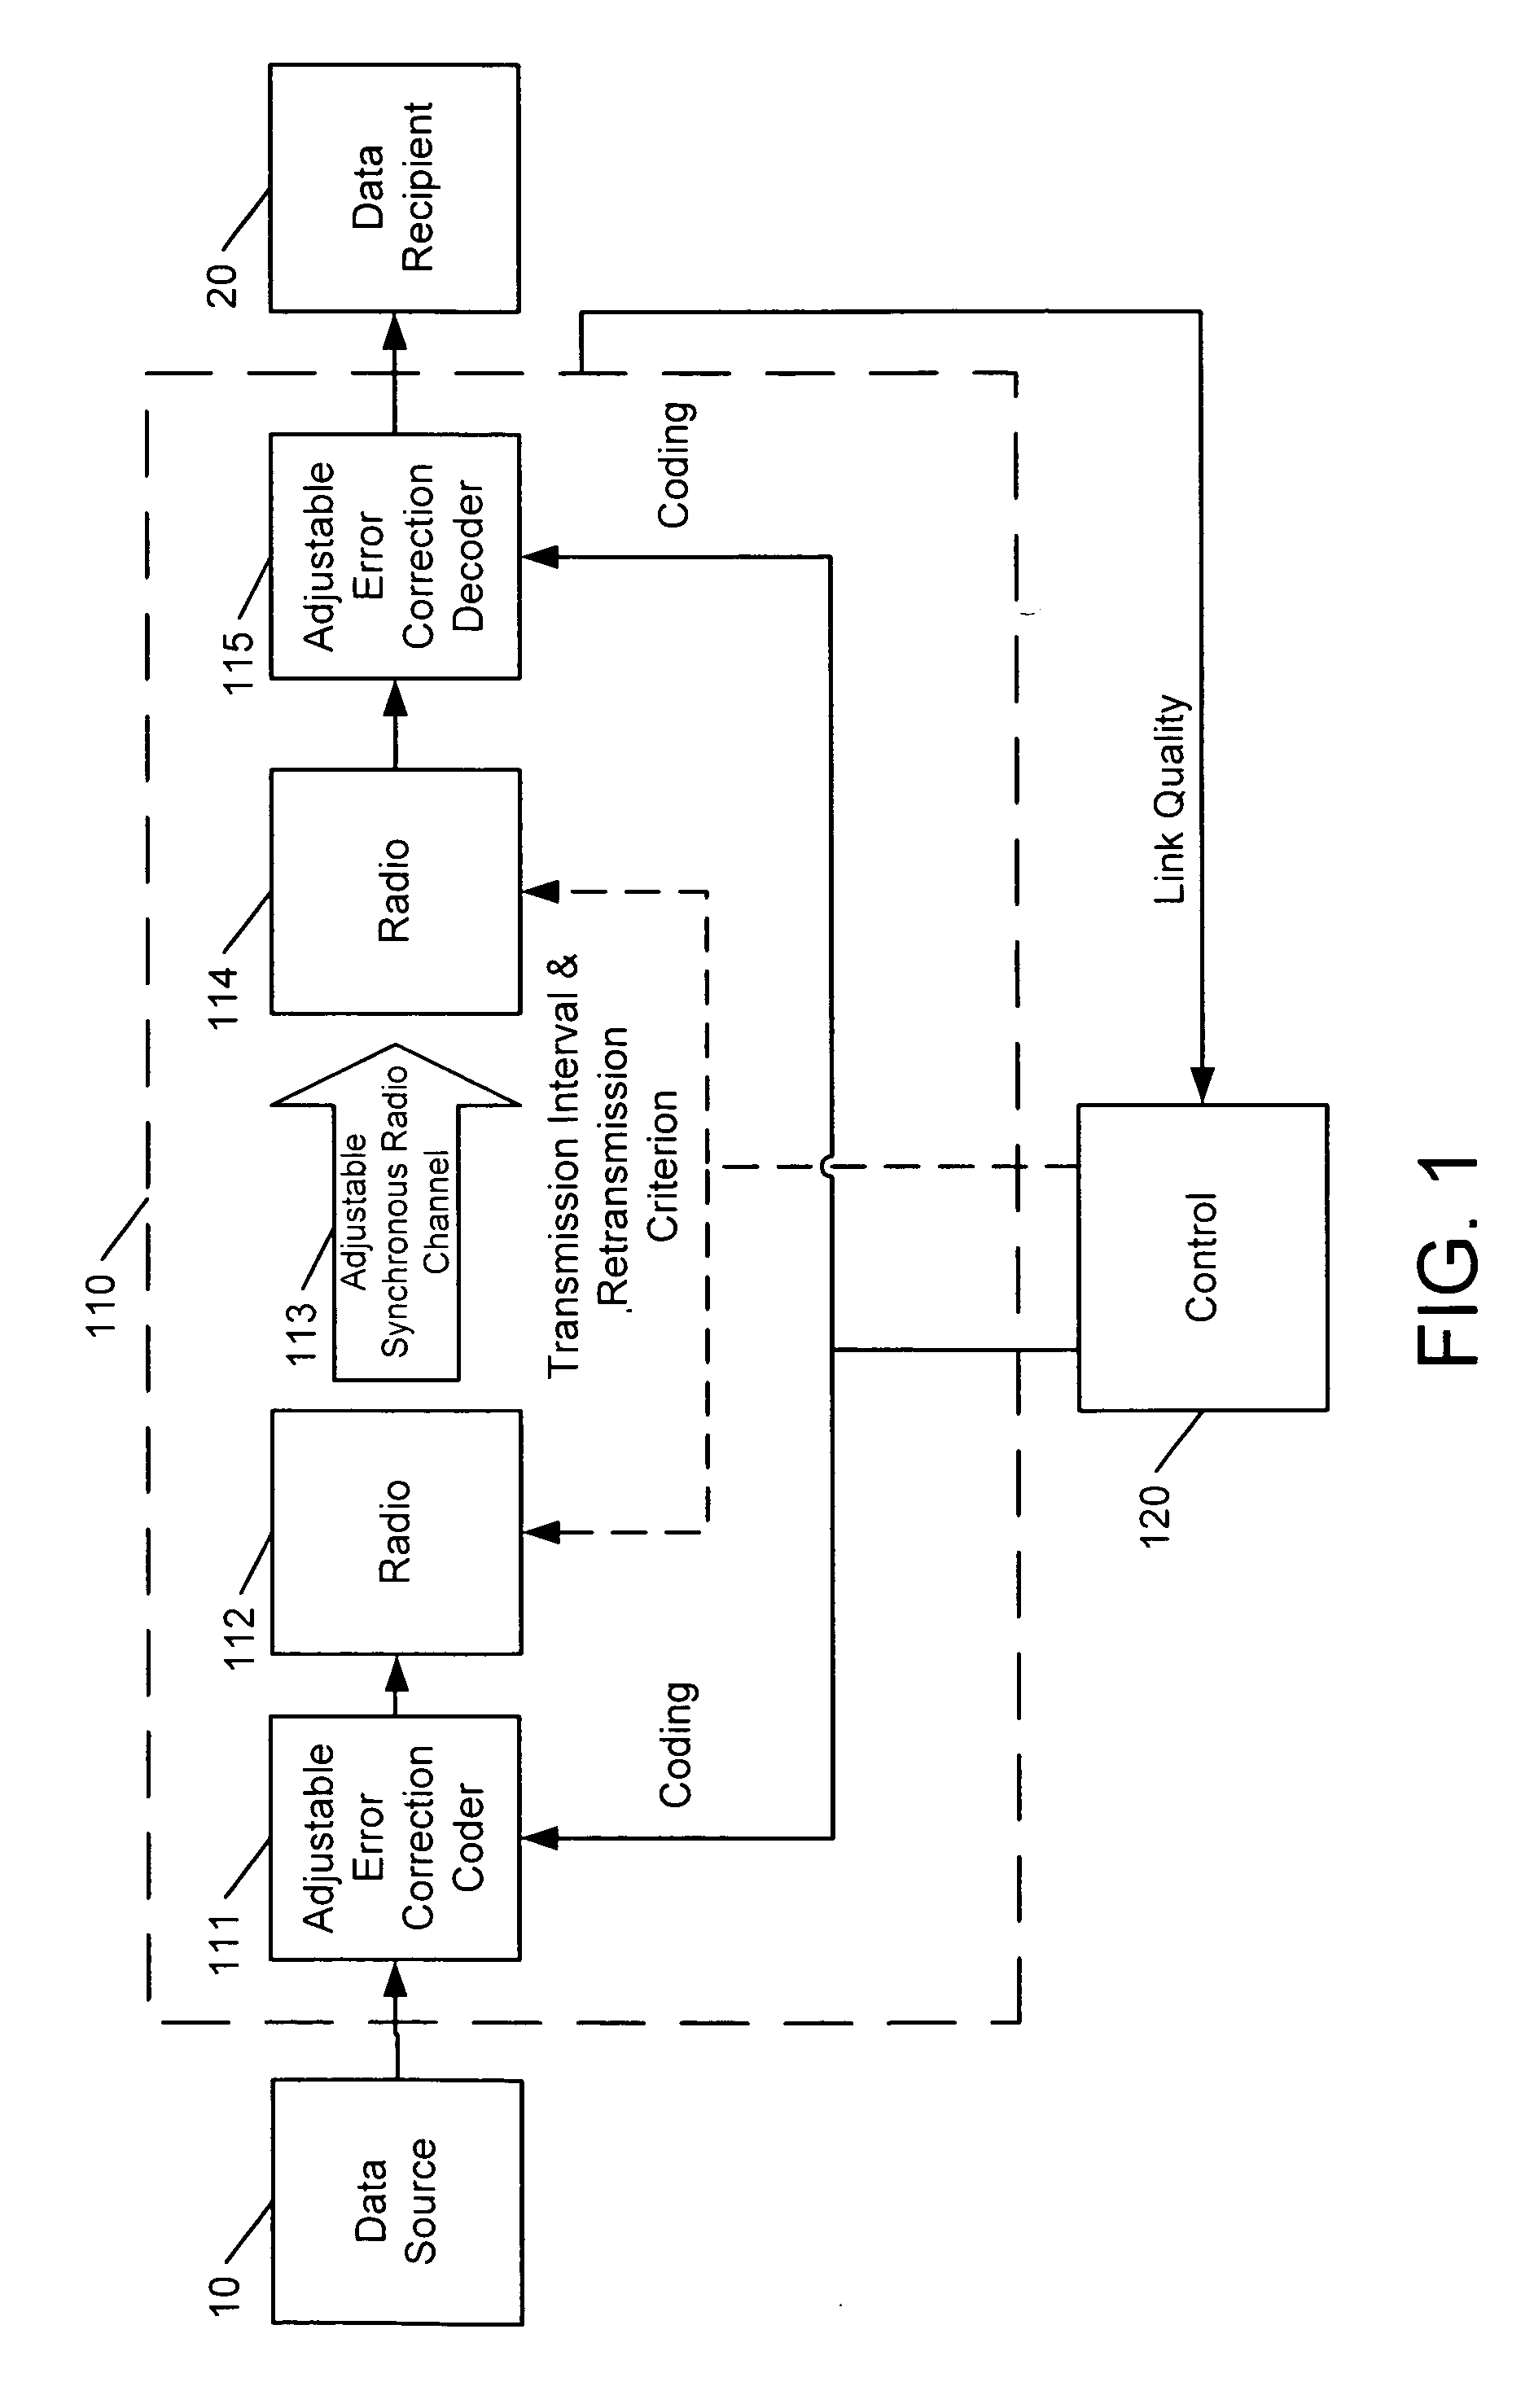 Apparatus, methods and computer program products for transmission of data over an adjustable synchronous radio channel